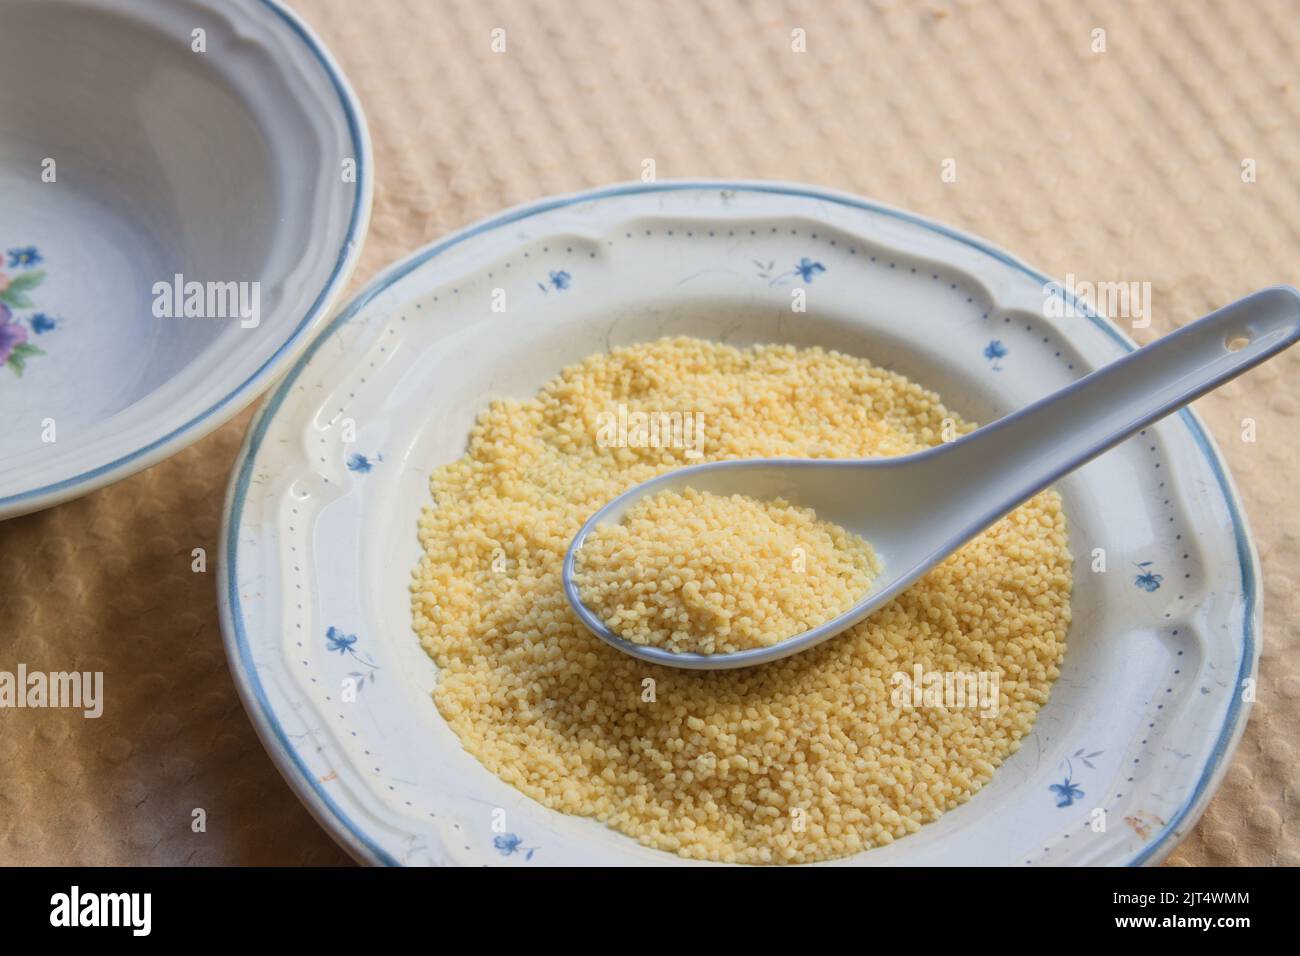 Image of a plate in which there is some raw semolina with a porcelain spoon on a cardboard surface Stock Photo